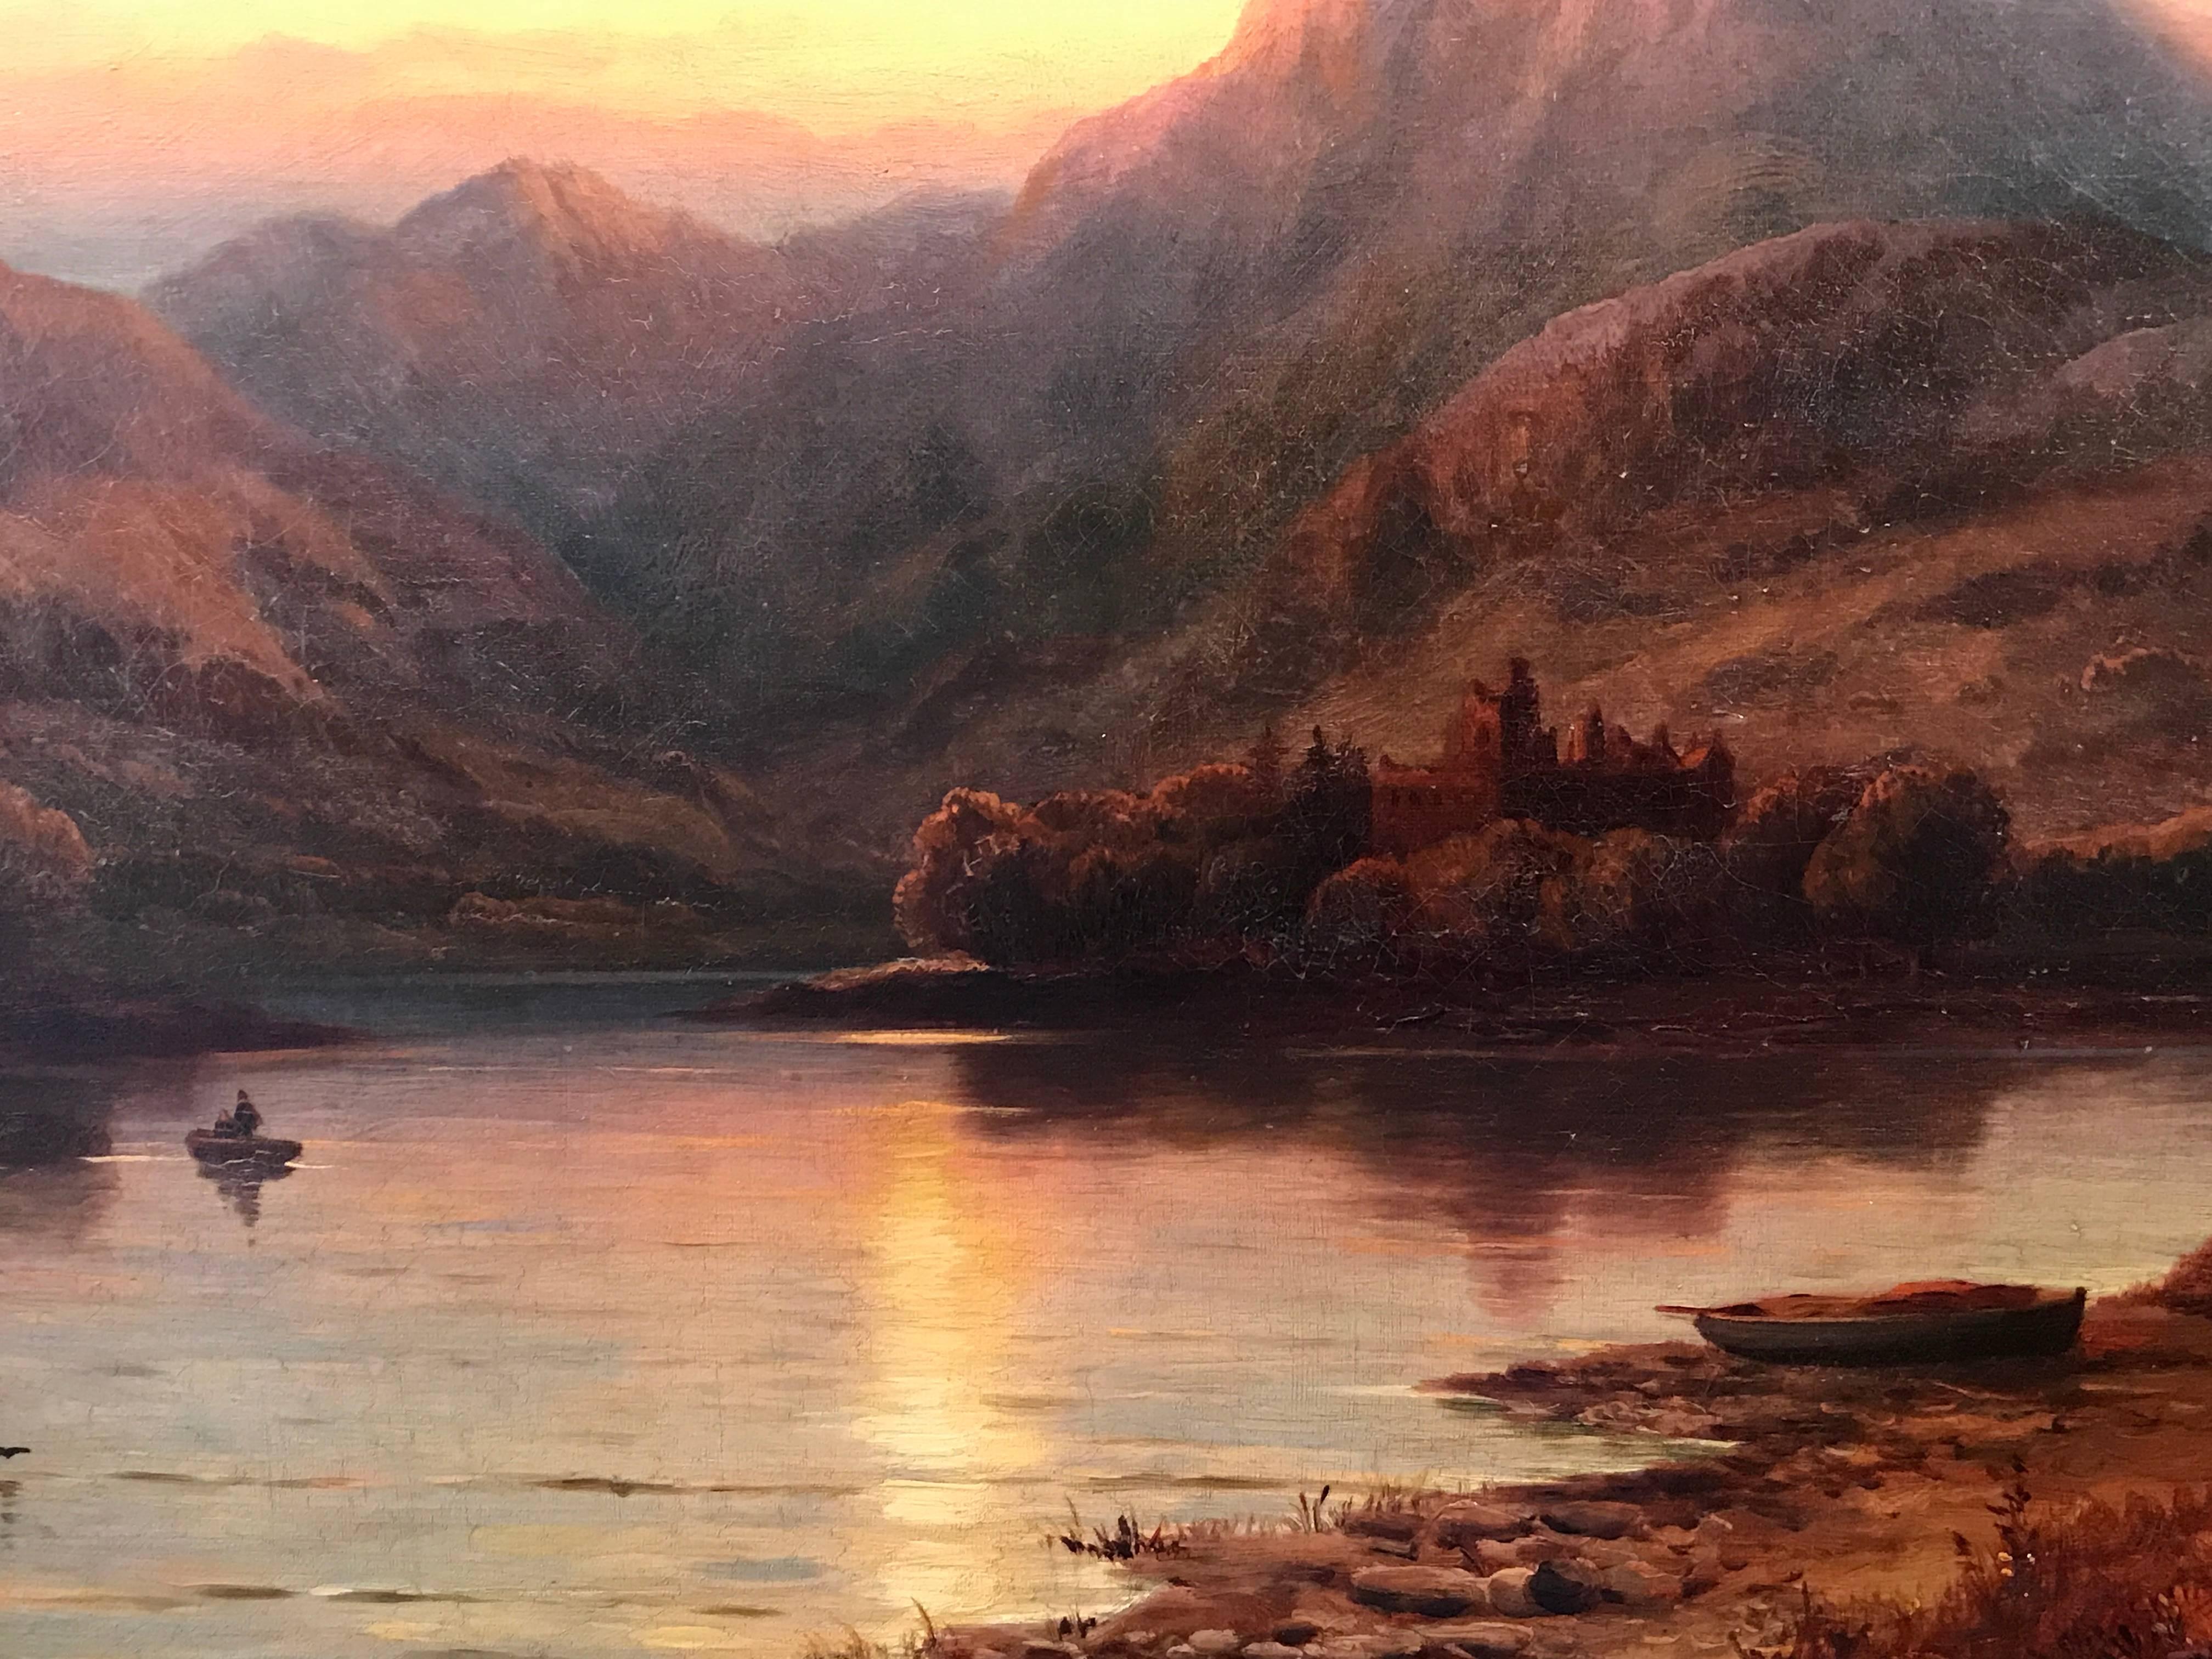 Sunset over the Loch, Victorian oil painting - Black Landscape Painting by Duncan Fraser McLea